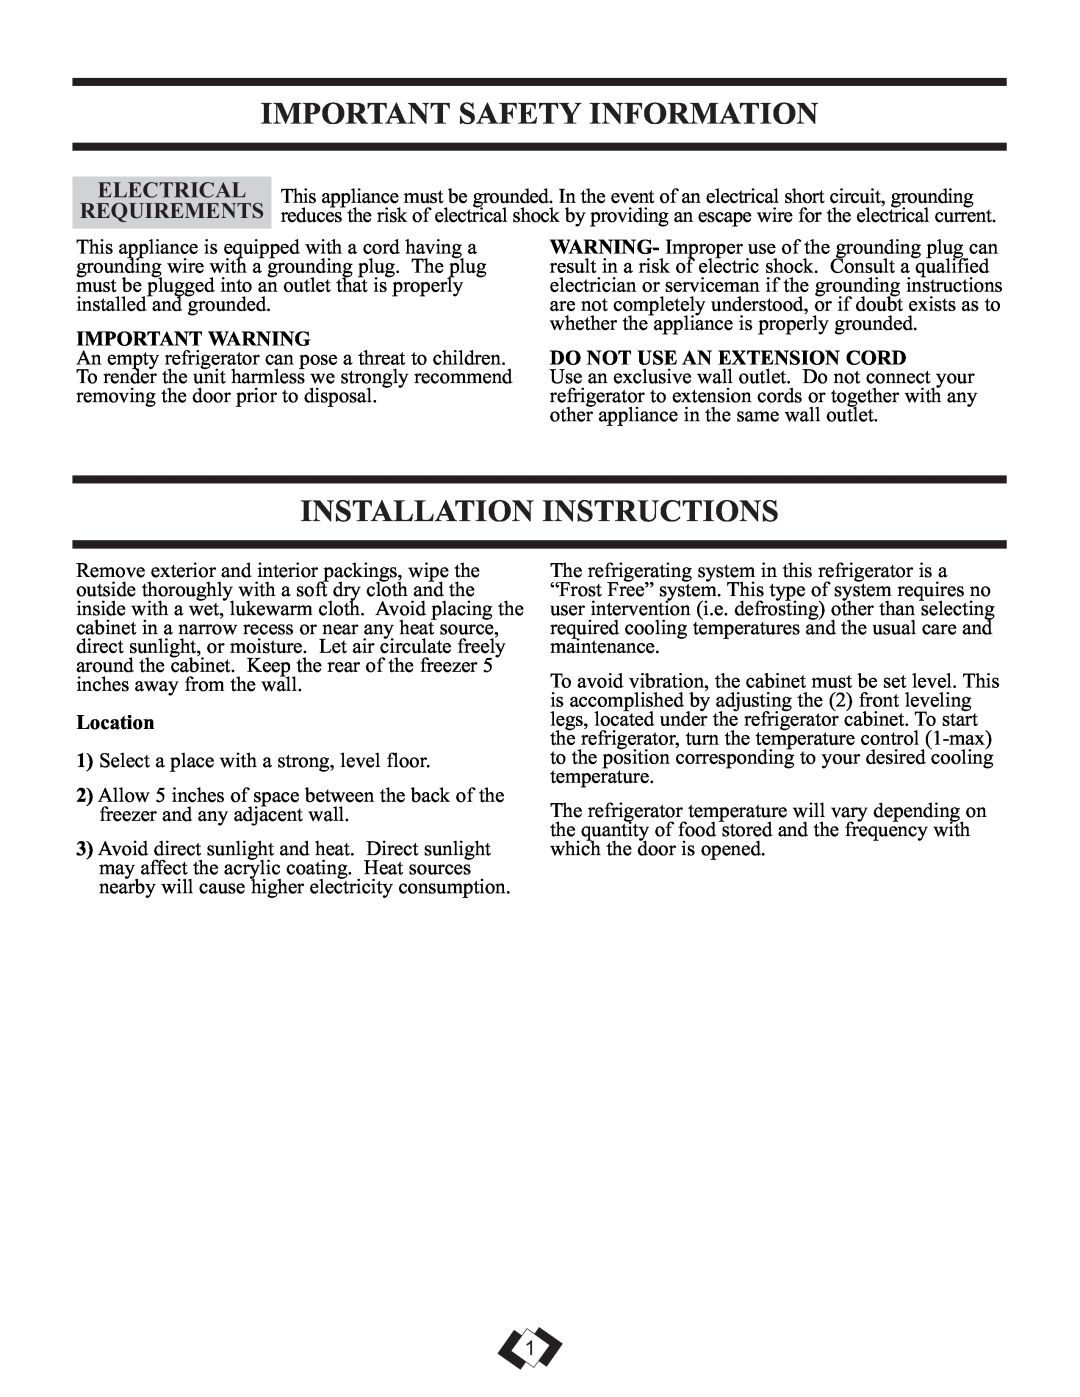 Sunbeam DFF258BLSSB Important Safety Information, Installation Instructions, Electrical, Requirements 